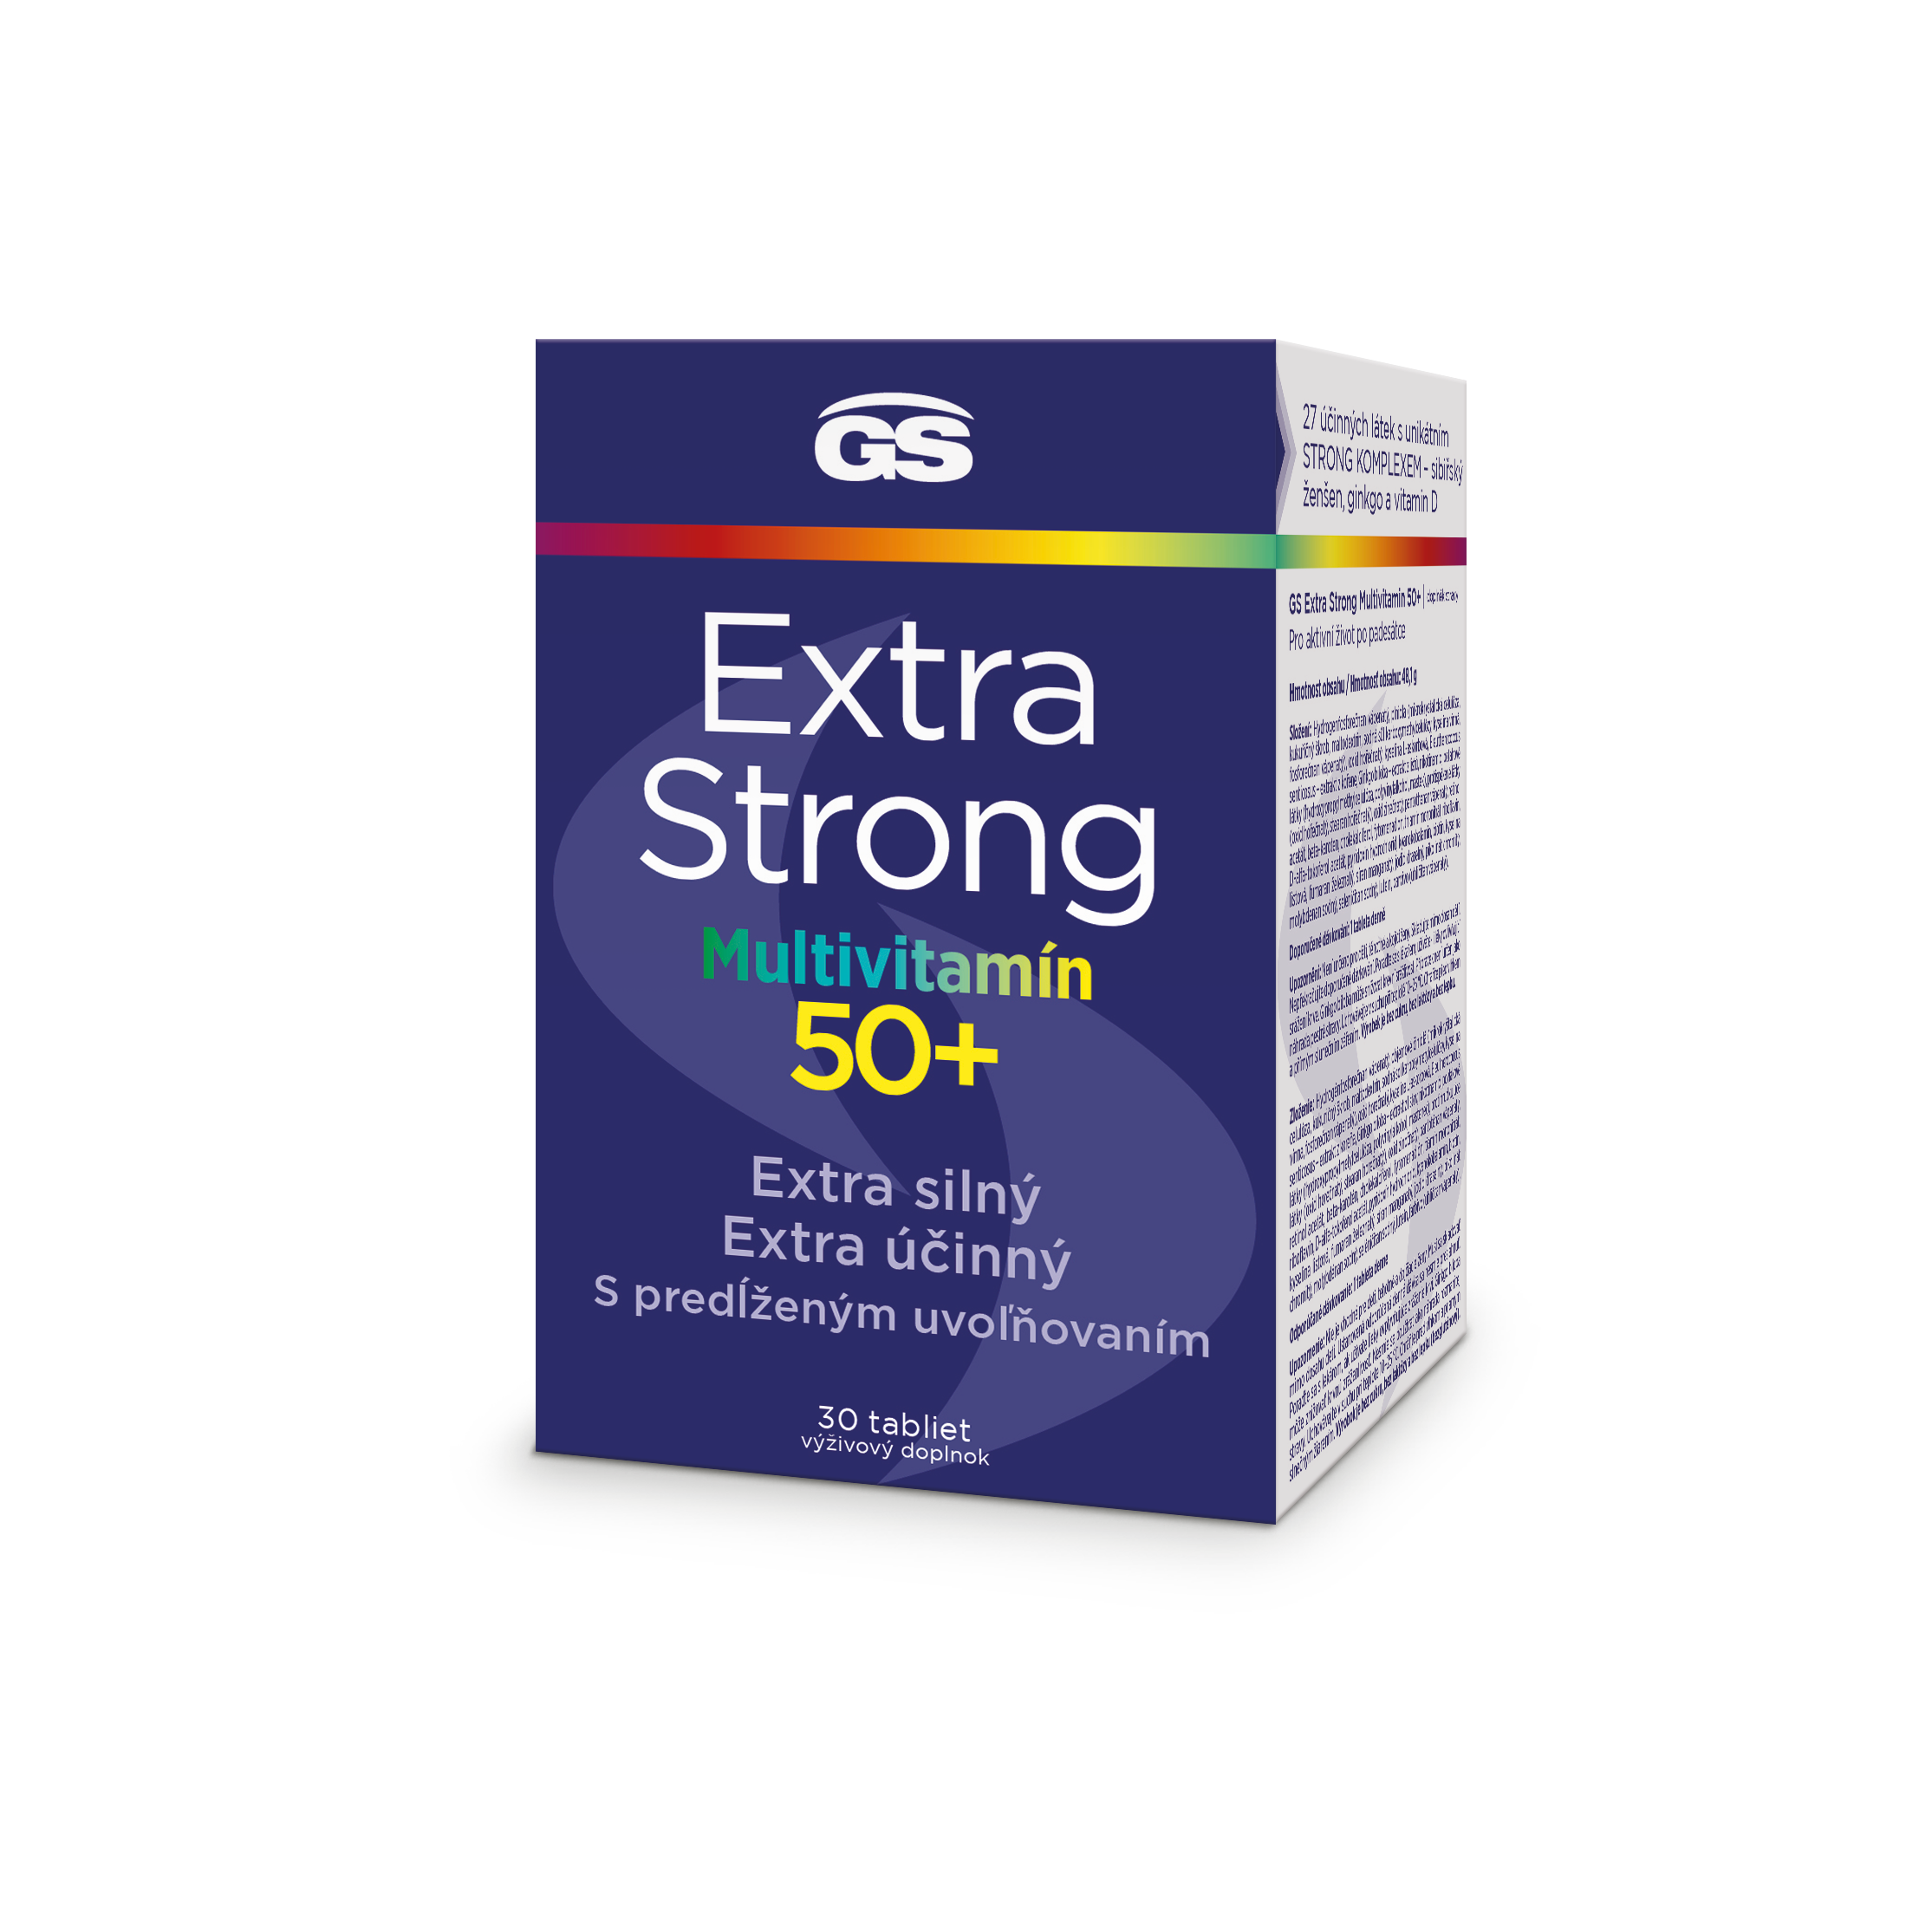 GS Extra Strong Multivitamin, 50 30 tbl